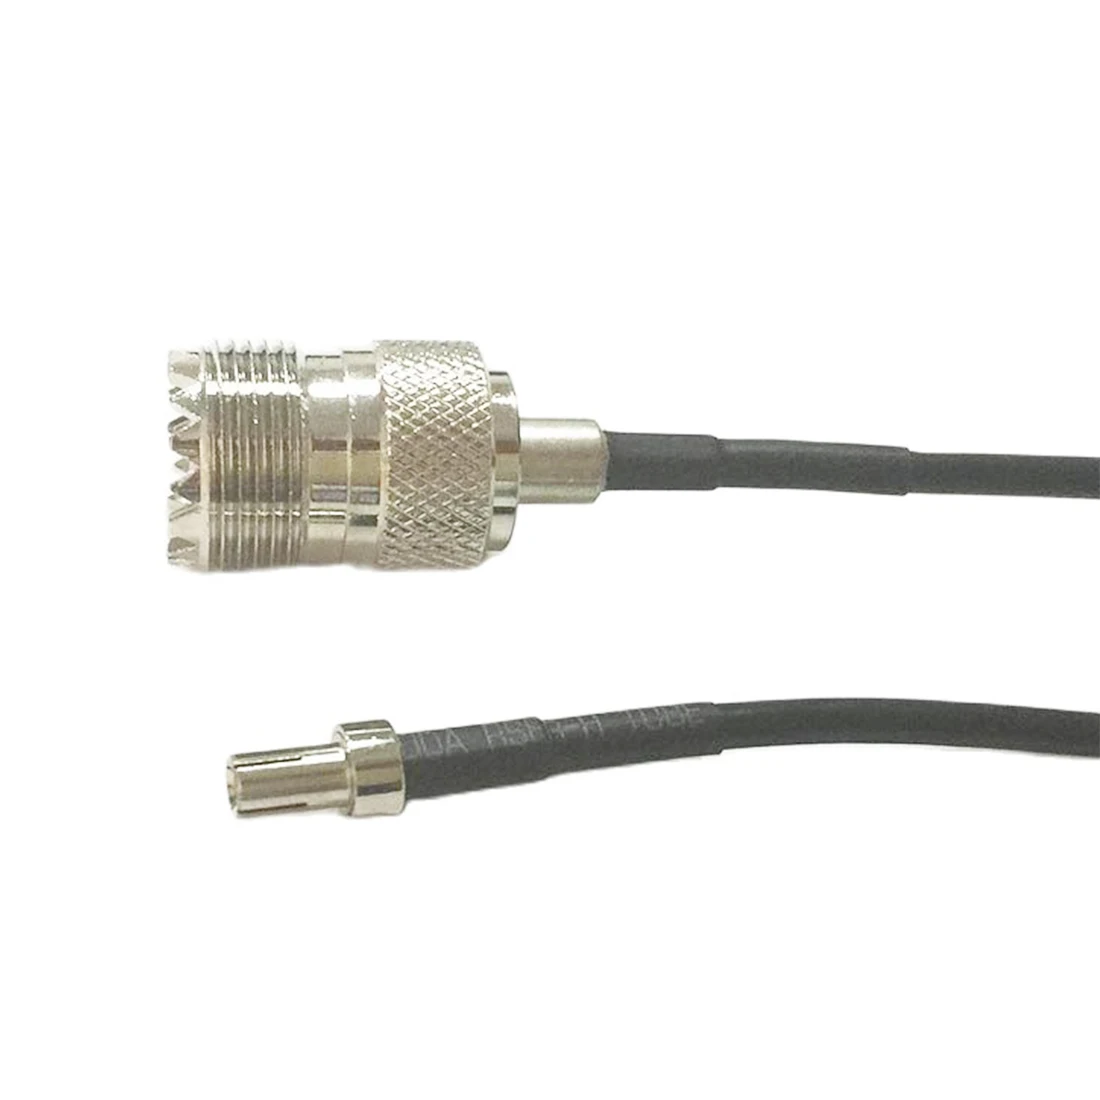 3G Antenna Cable TS9 Straight Right Angle to UHF Female SO239 Pigtail Adapter RG174 10cm/15cm/20cm/30cm/50cm/100cm  Wholesale